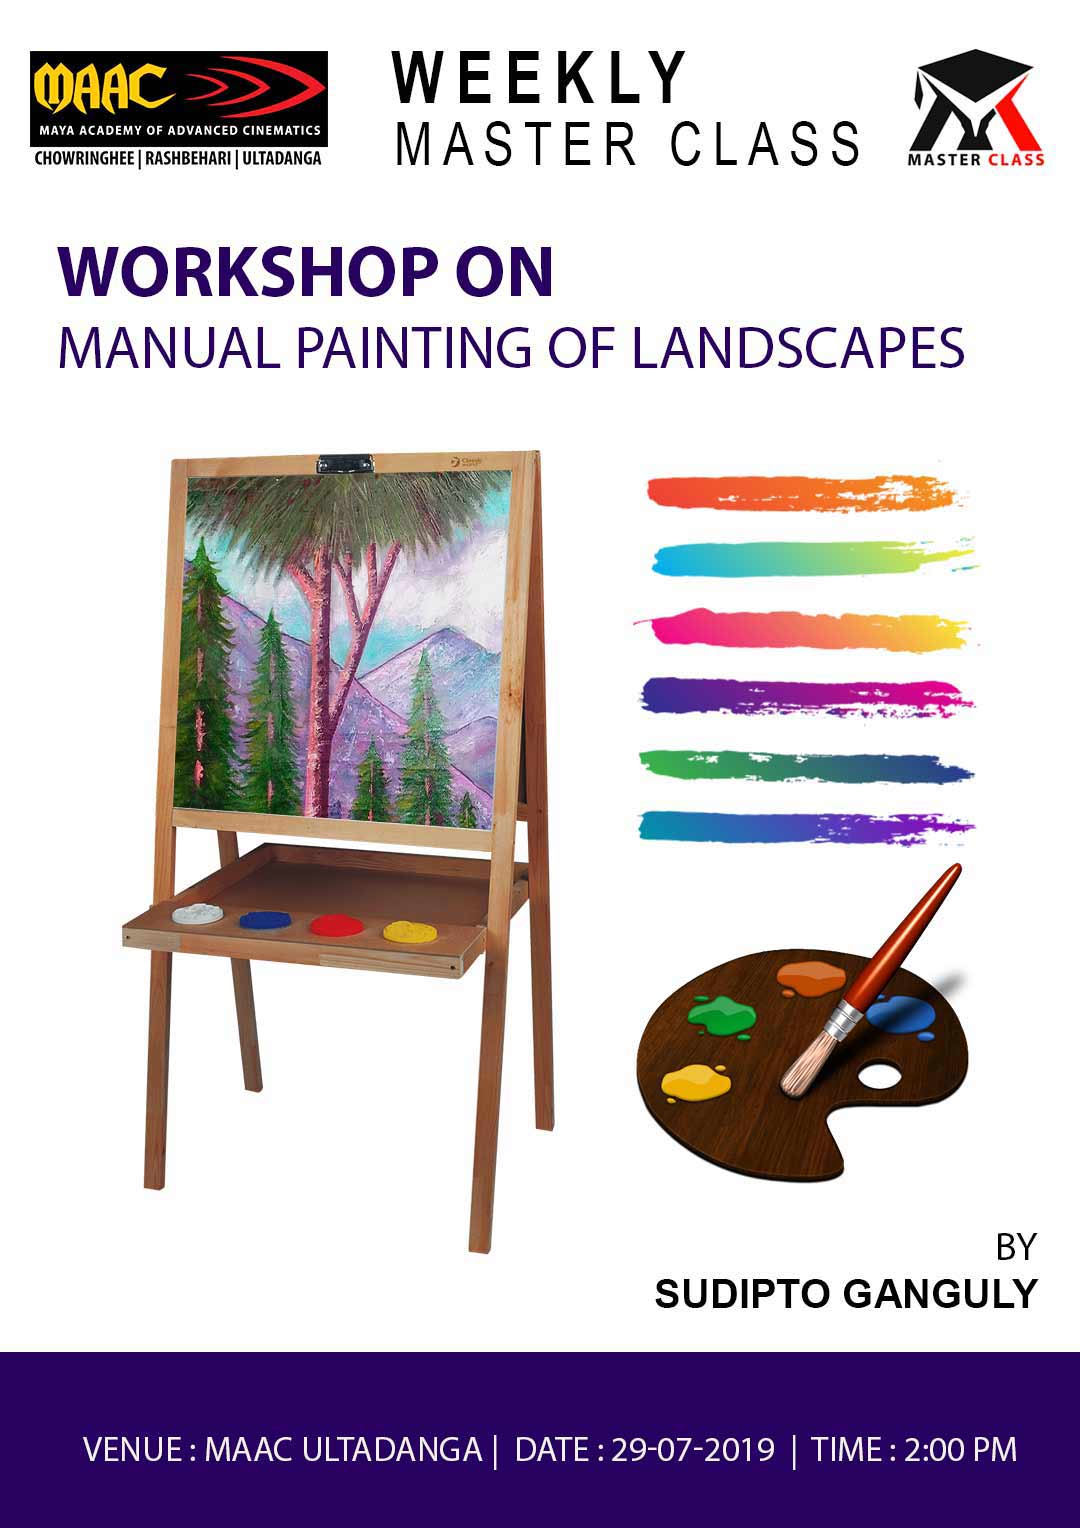 Weekly Master Class on Manual Painting of Landscapes